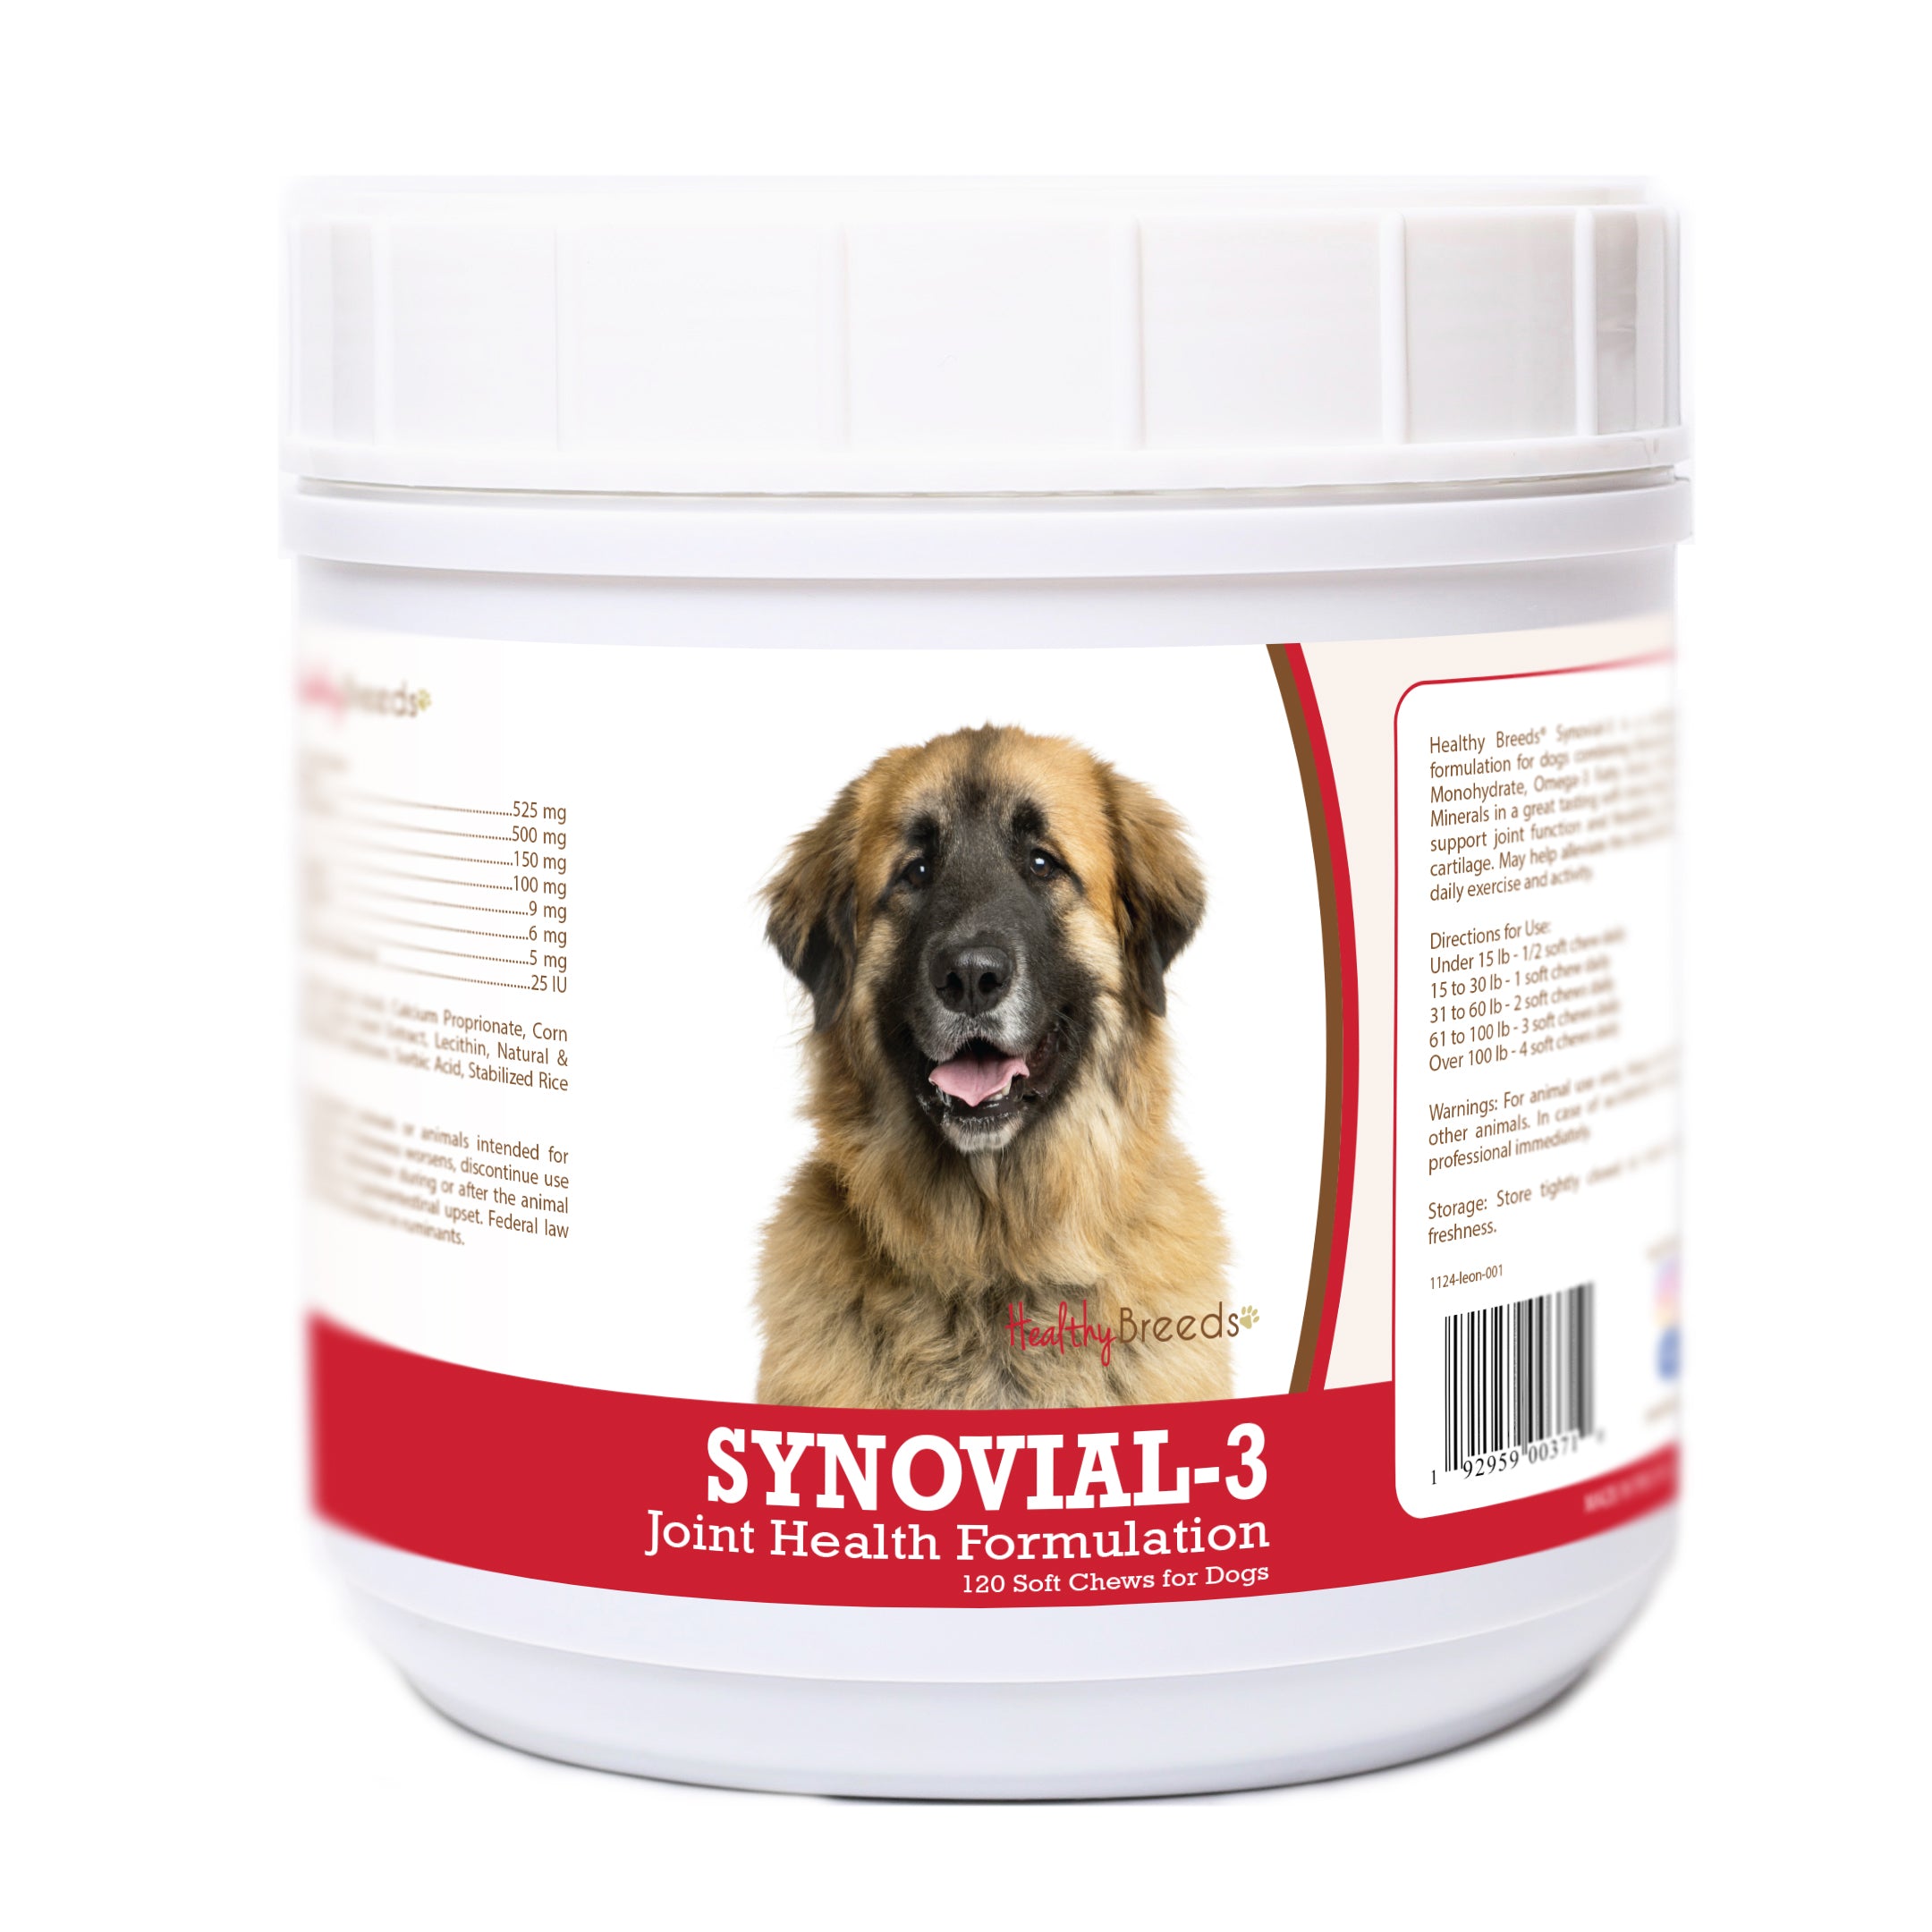 Leonberger Synovial-3 Joint Health Formulation Soft Chews 120 Count